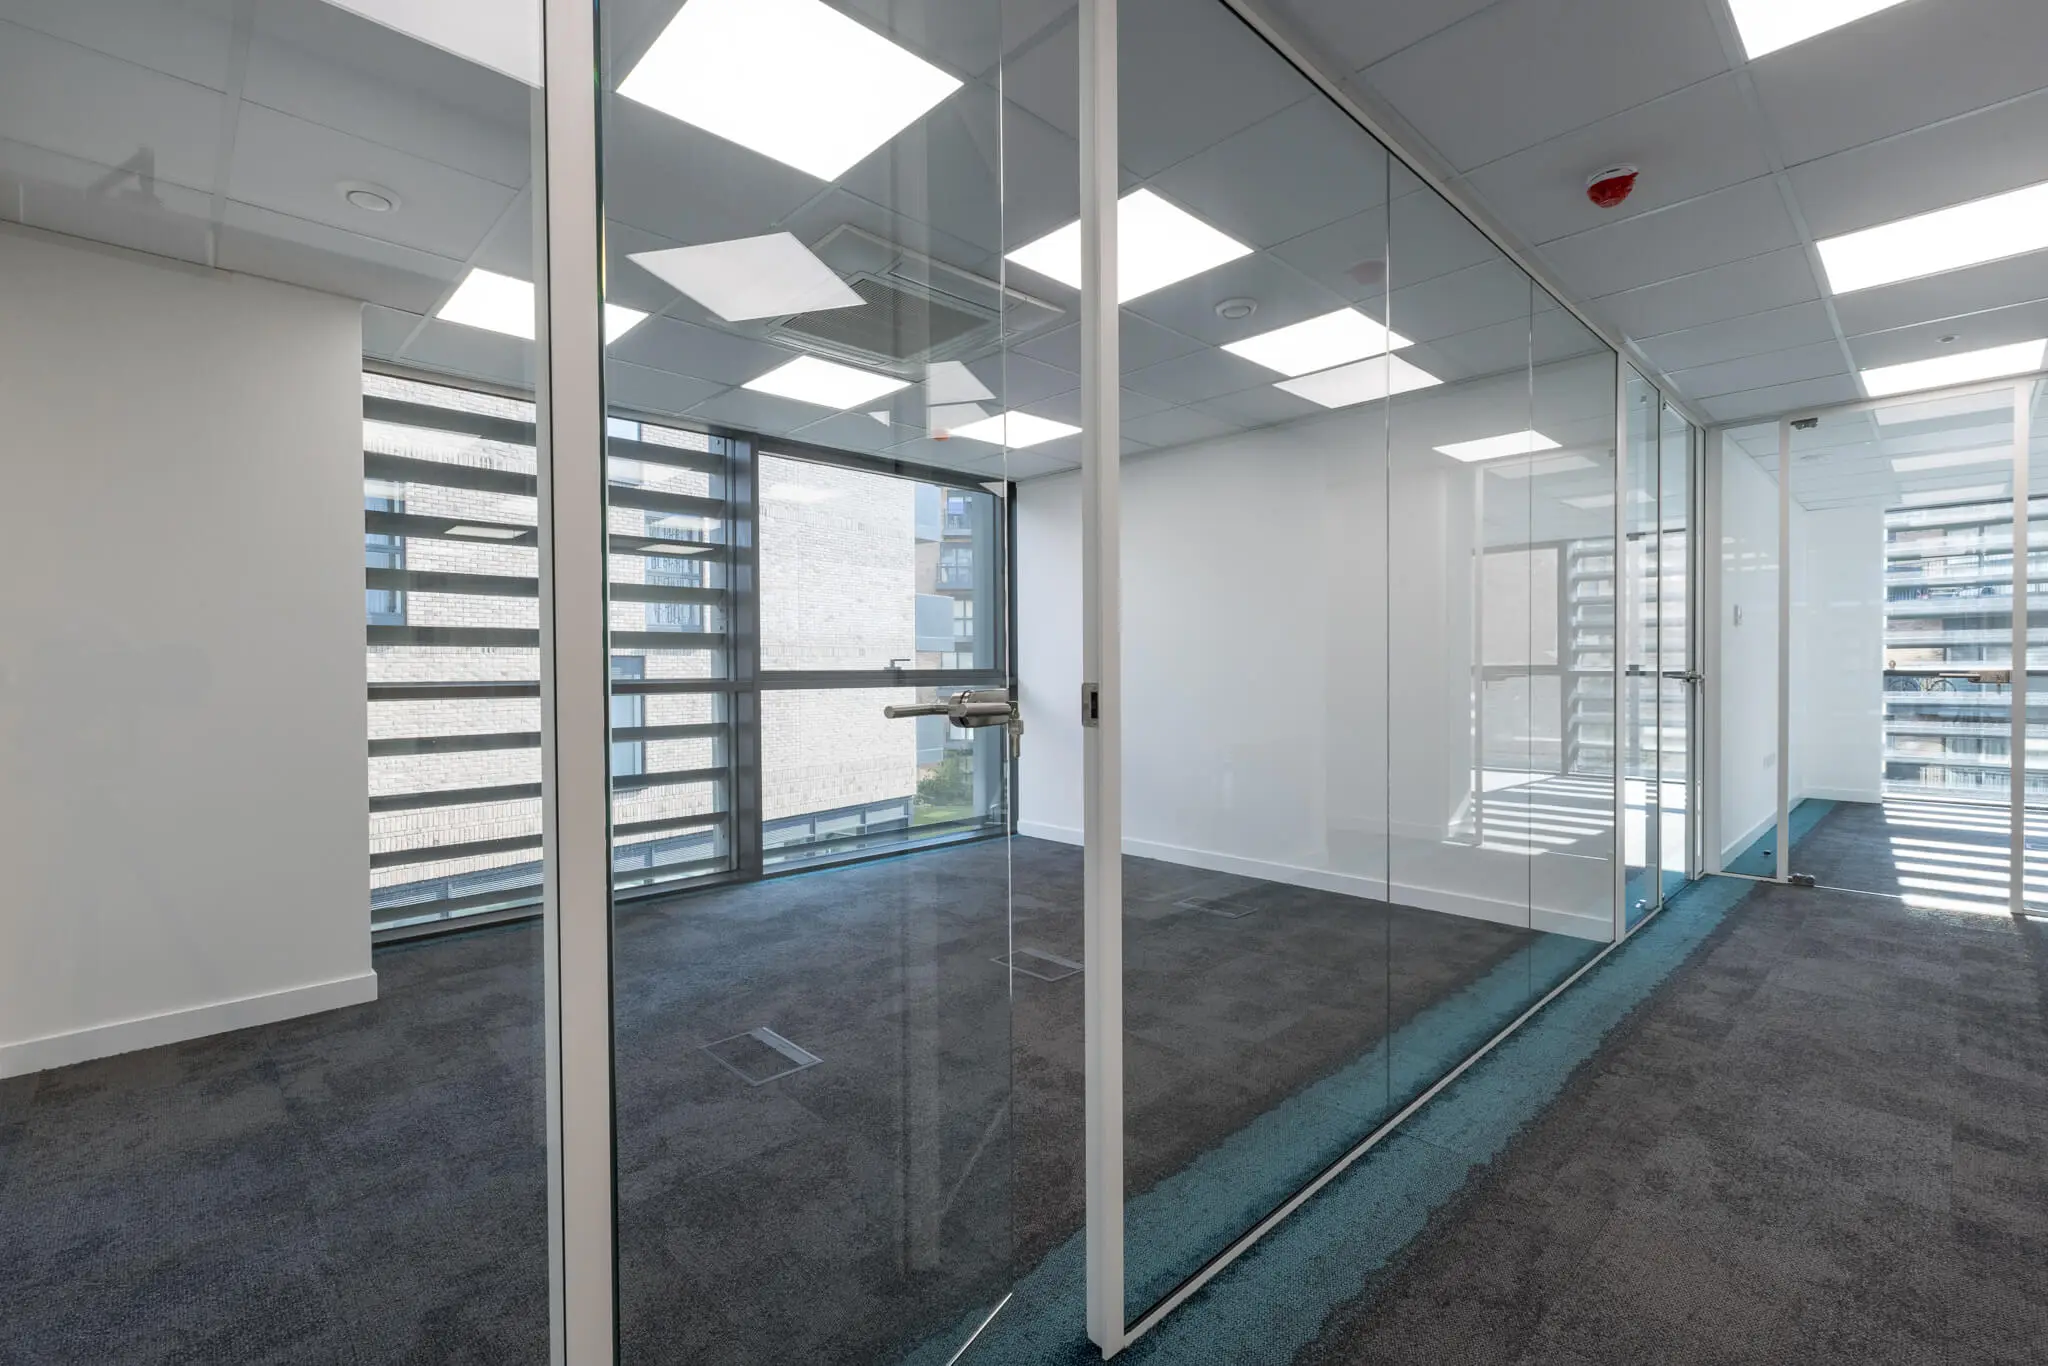 Glass seperated office space